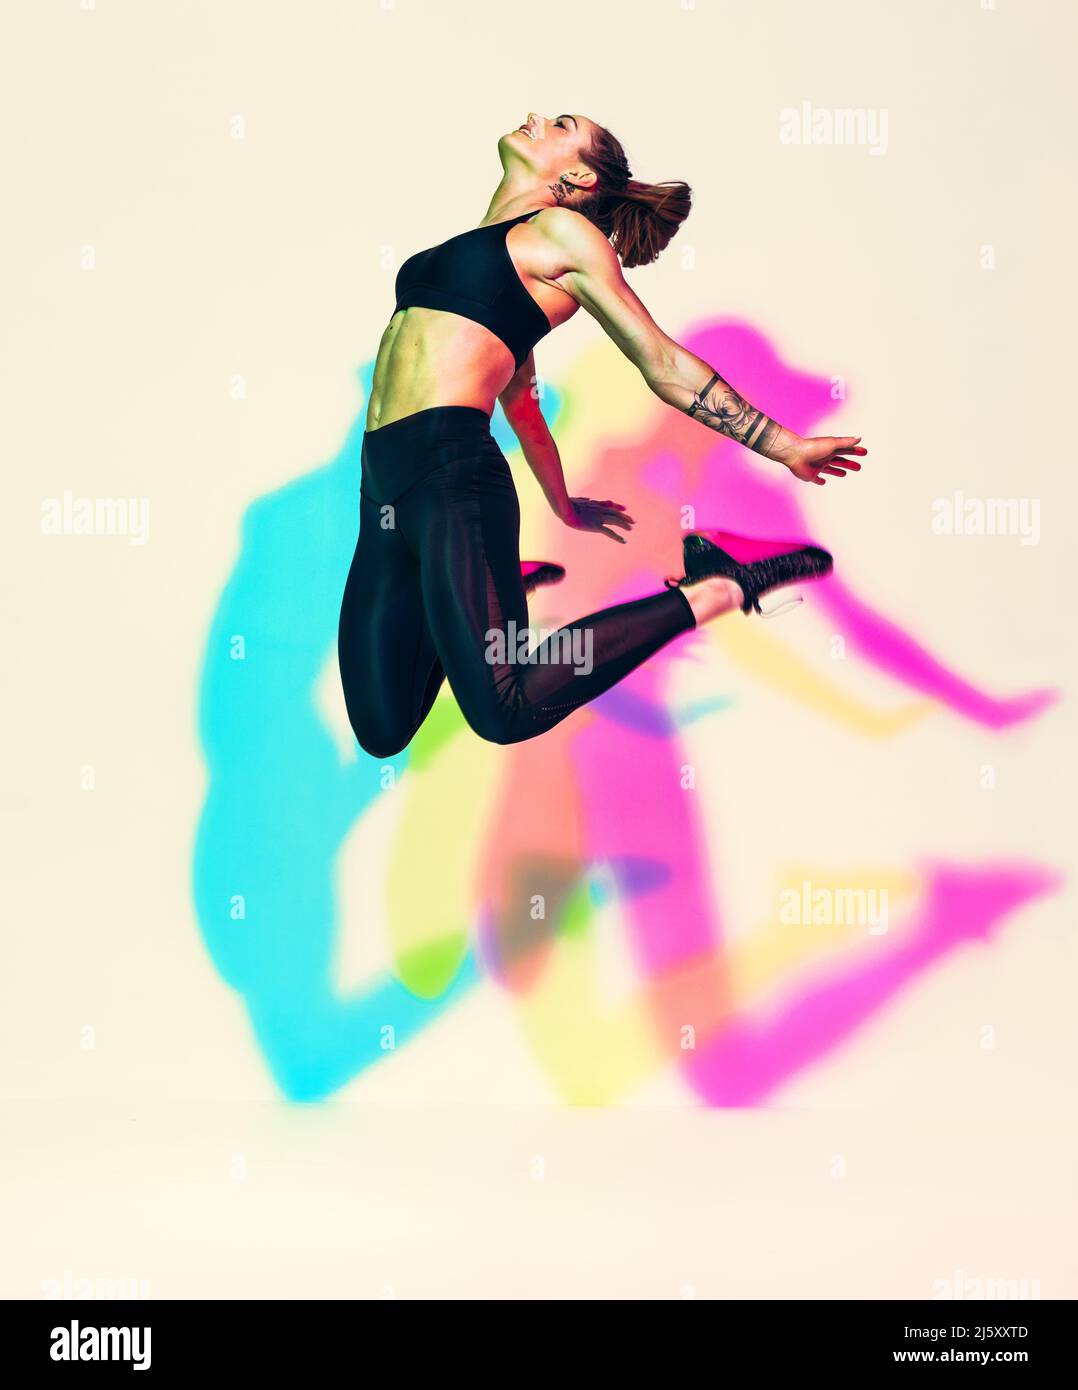 Sporty woman jumping up in silhouette. Photo of muscular woman in black sportswear on white background with effect of rgb colors shadows. Dynamic move Stock Photo